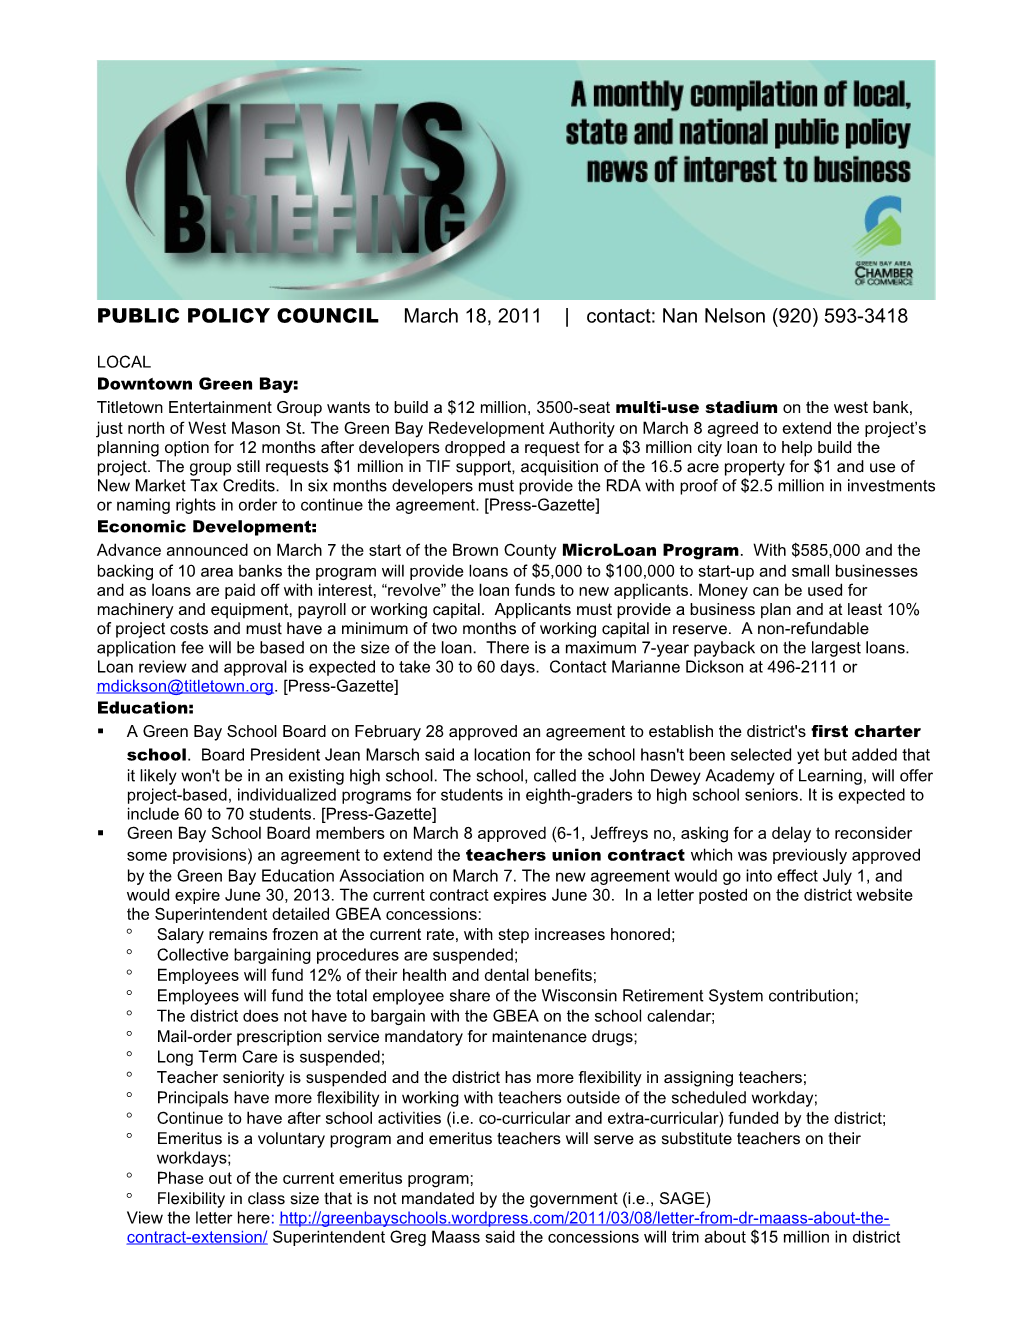 PUBLIC POLICY COUNCIL News Briefing Date Contact: Nan Nelson (920) 437-8704 s1